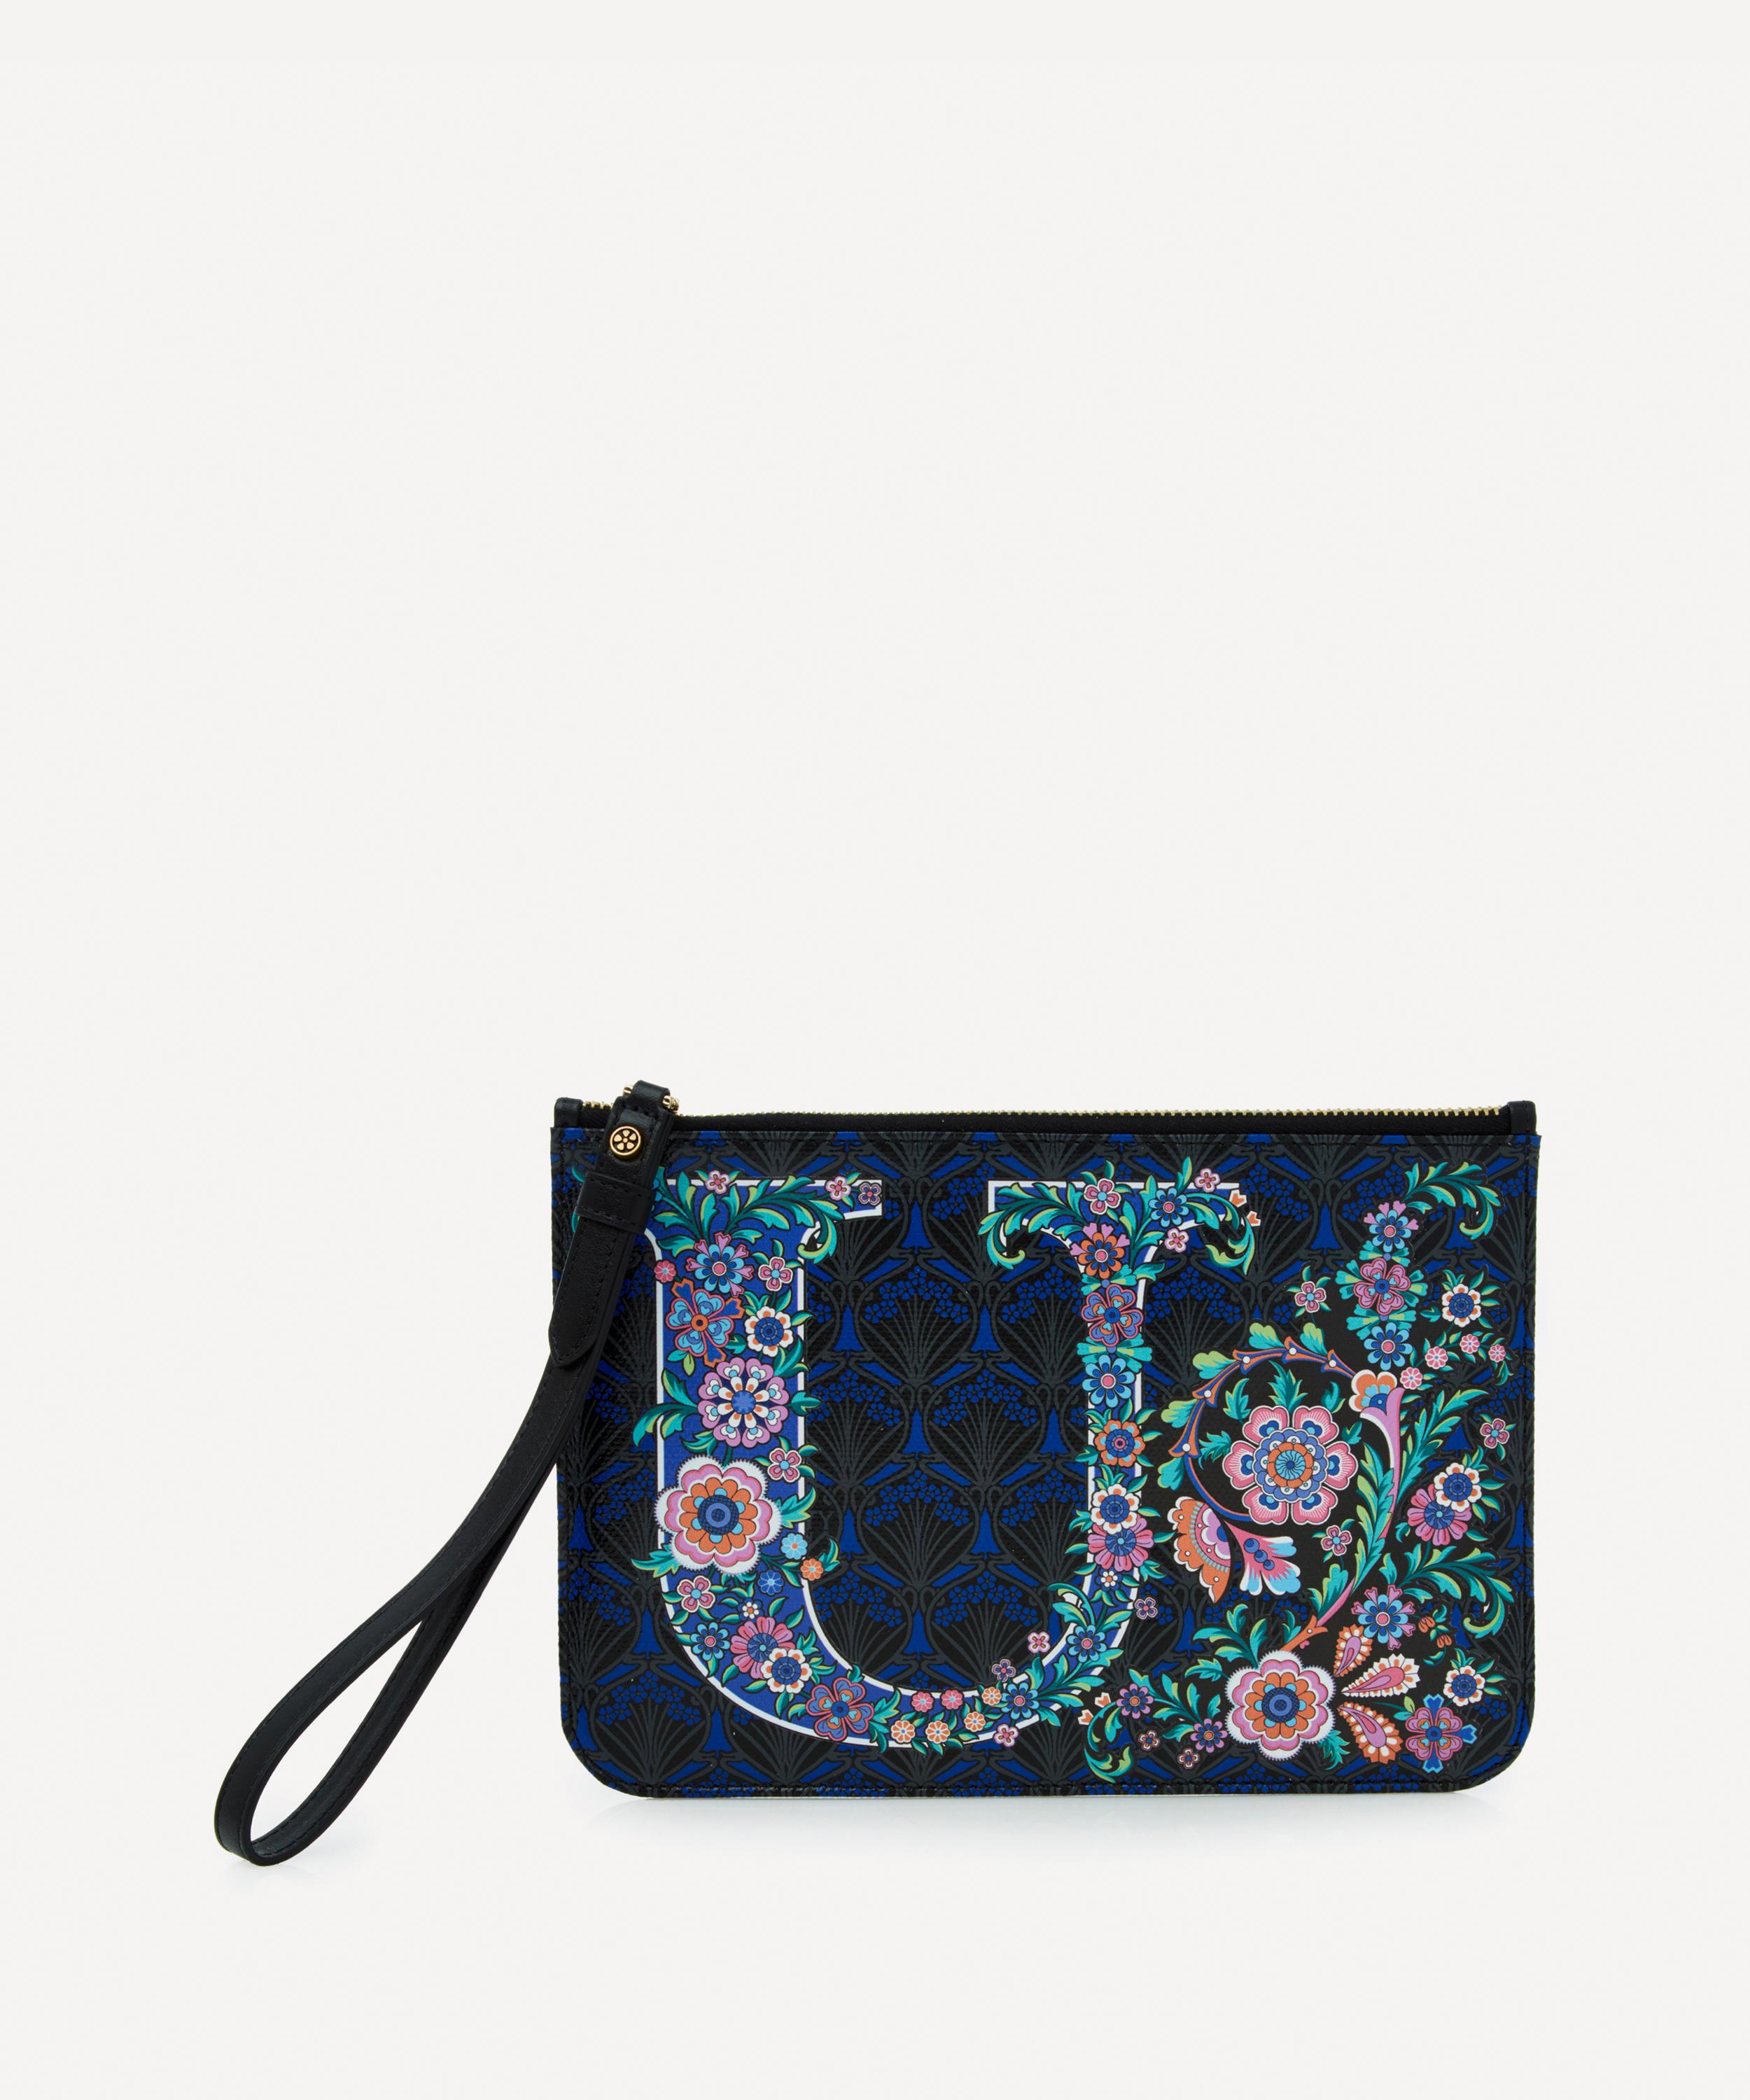 Small Accessories | Liberty Products | Liberty London